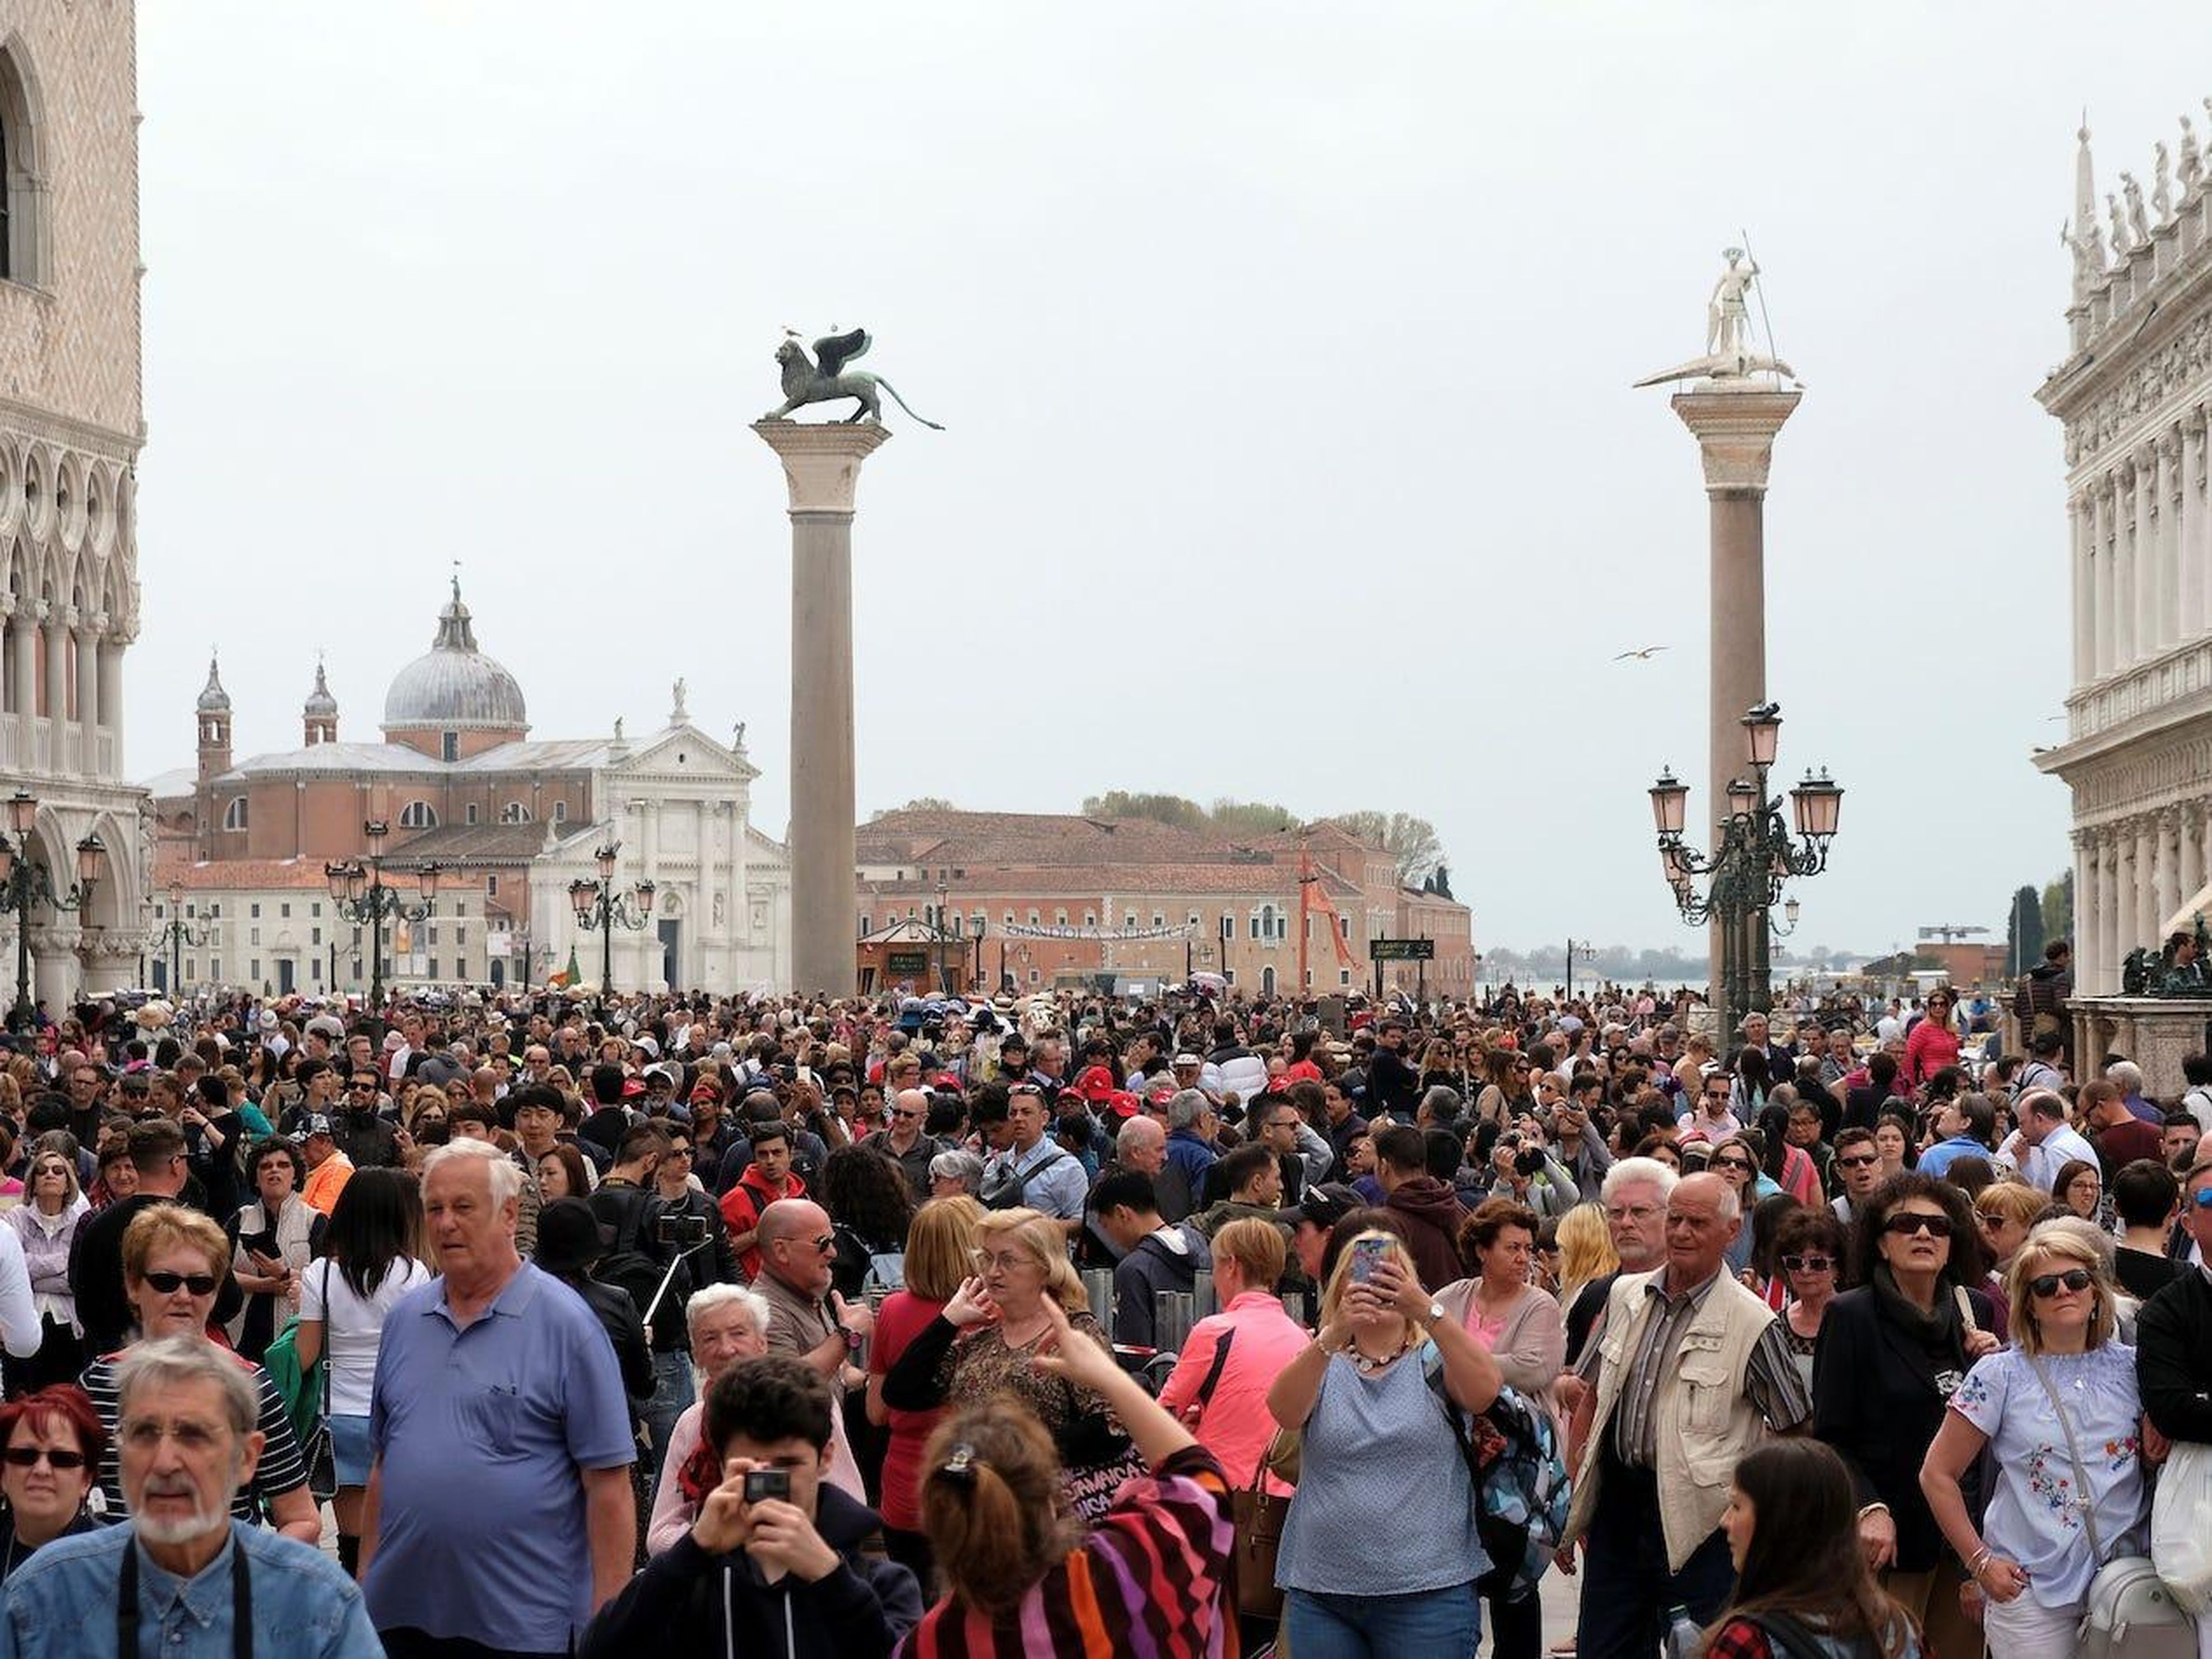 BEFORE: St. Mark's Square in Venice, Italy, is a tourist hot spot that sees 26 million to 30 million visitors annually.